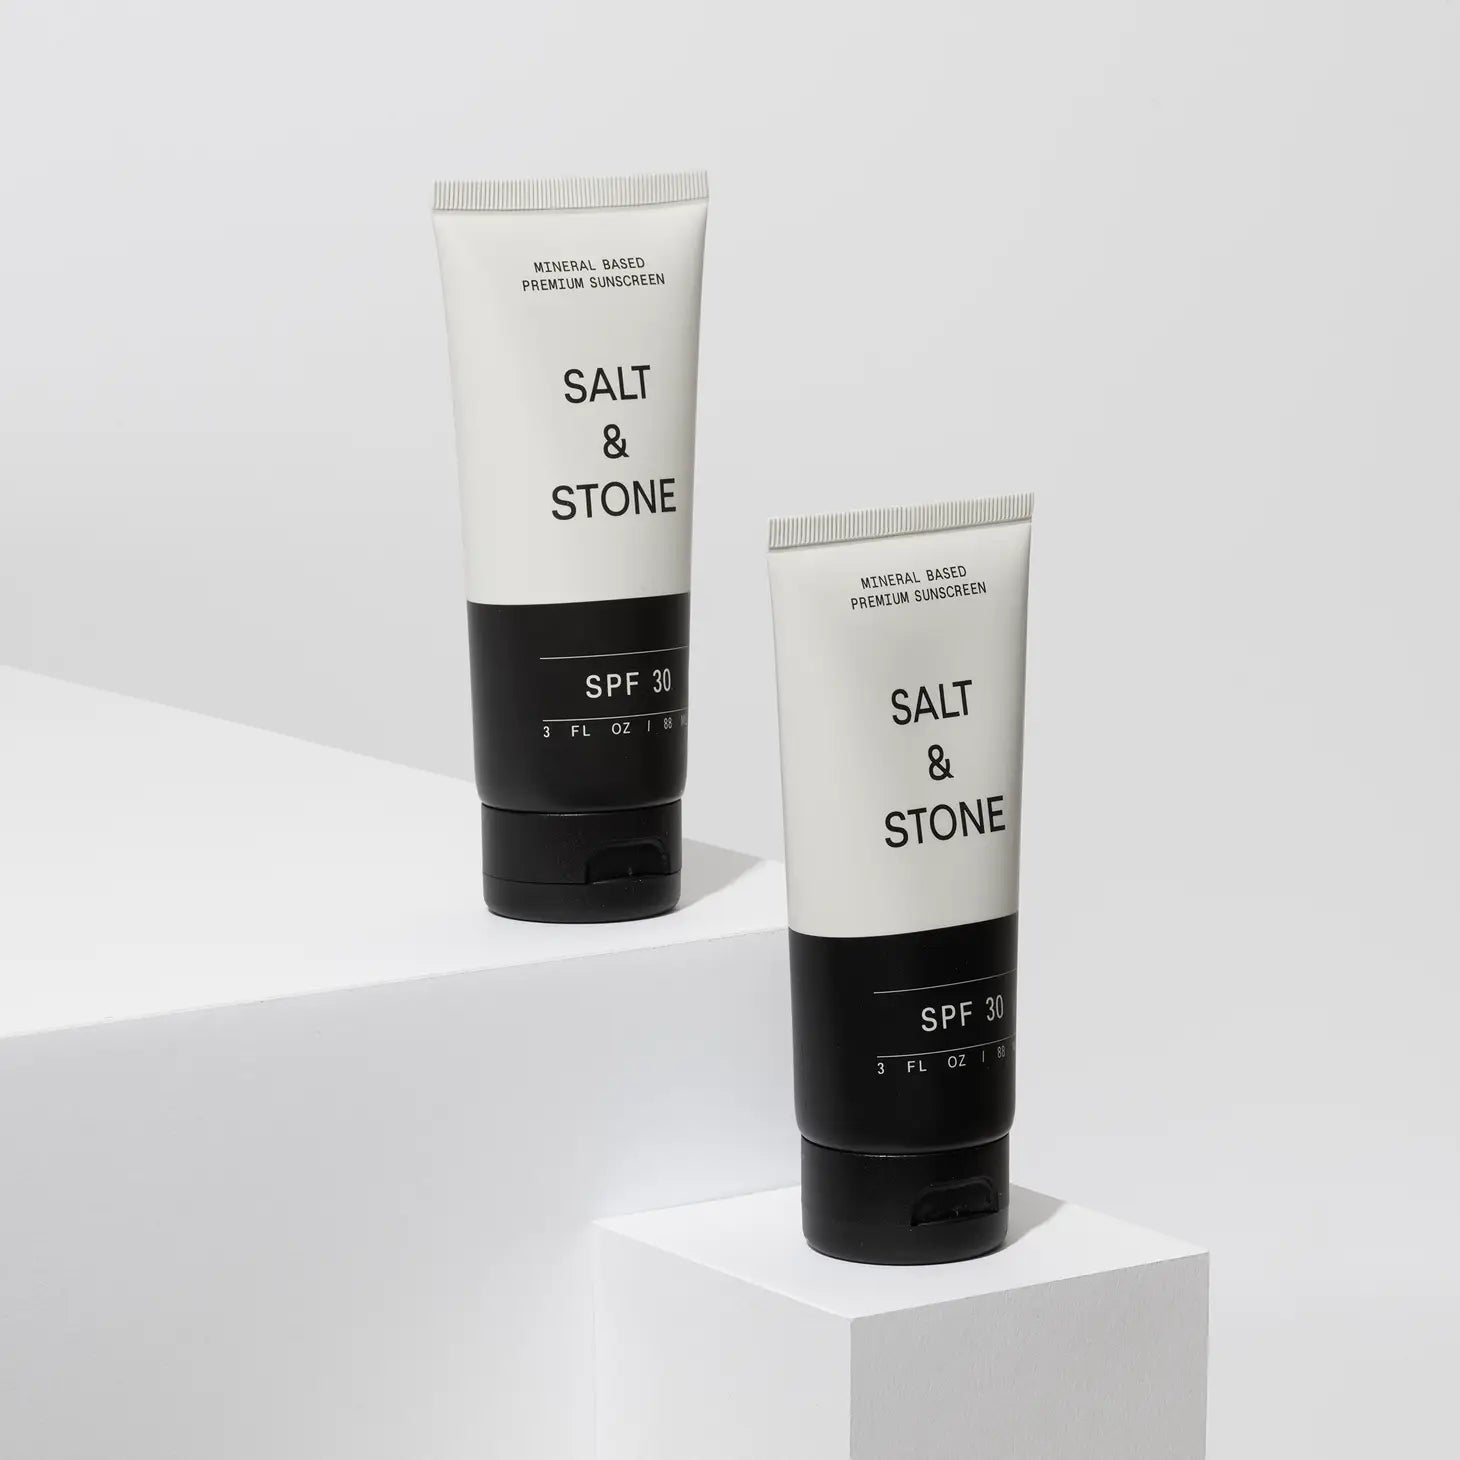 Salt & Stone Natural Mineral Sunscreen Lotion - Spf 30 | Prelude & Dawn | Los Angeles